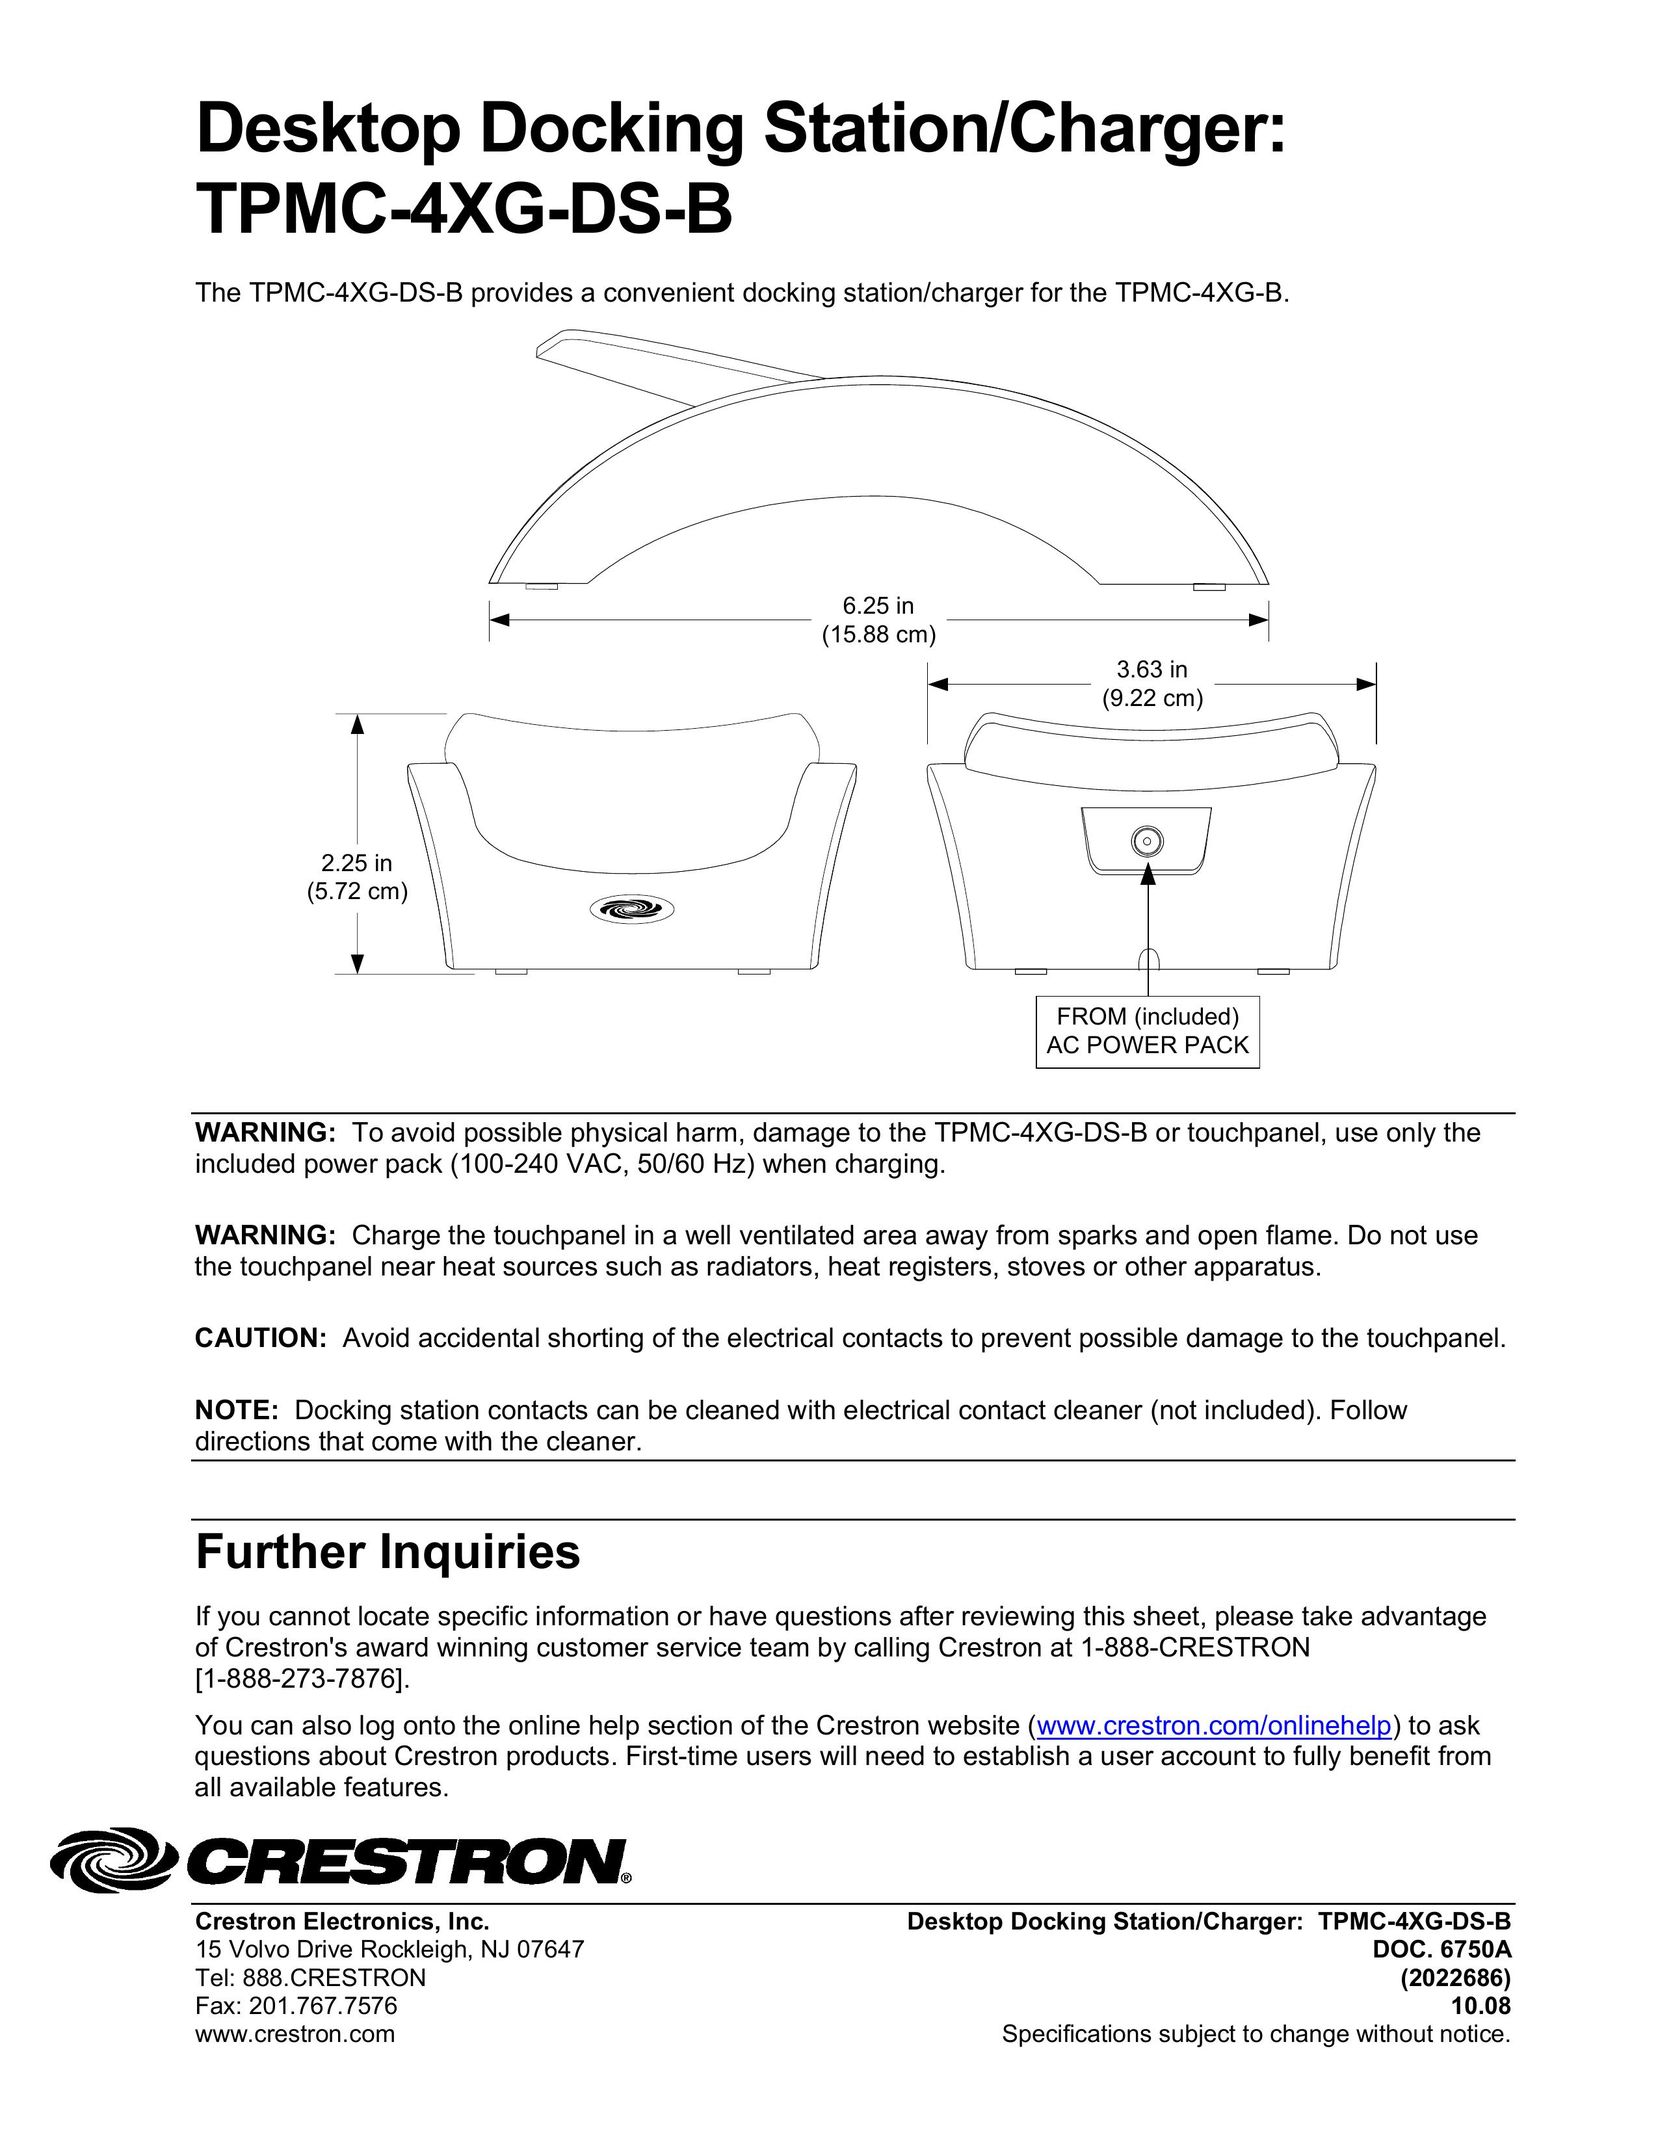 Crestron electronic TPMC-4XG-DS-B MP3 Docking Station User Manual